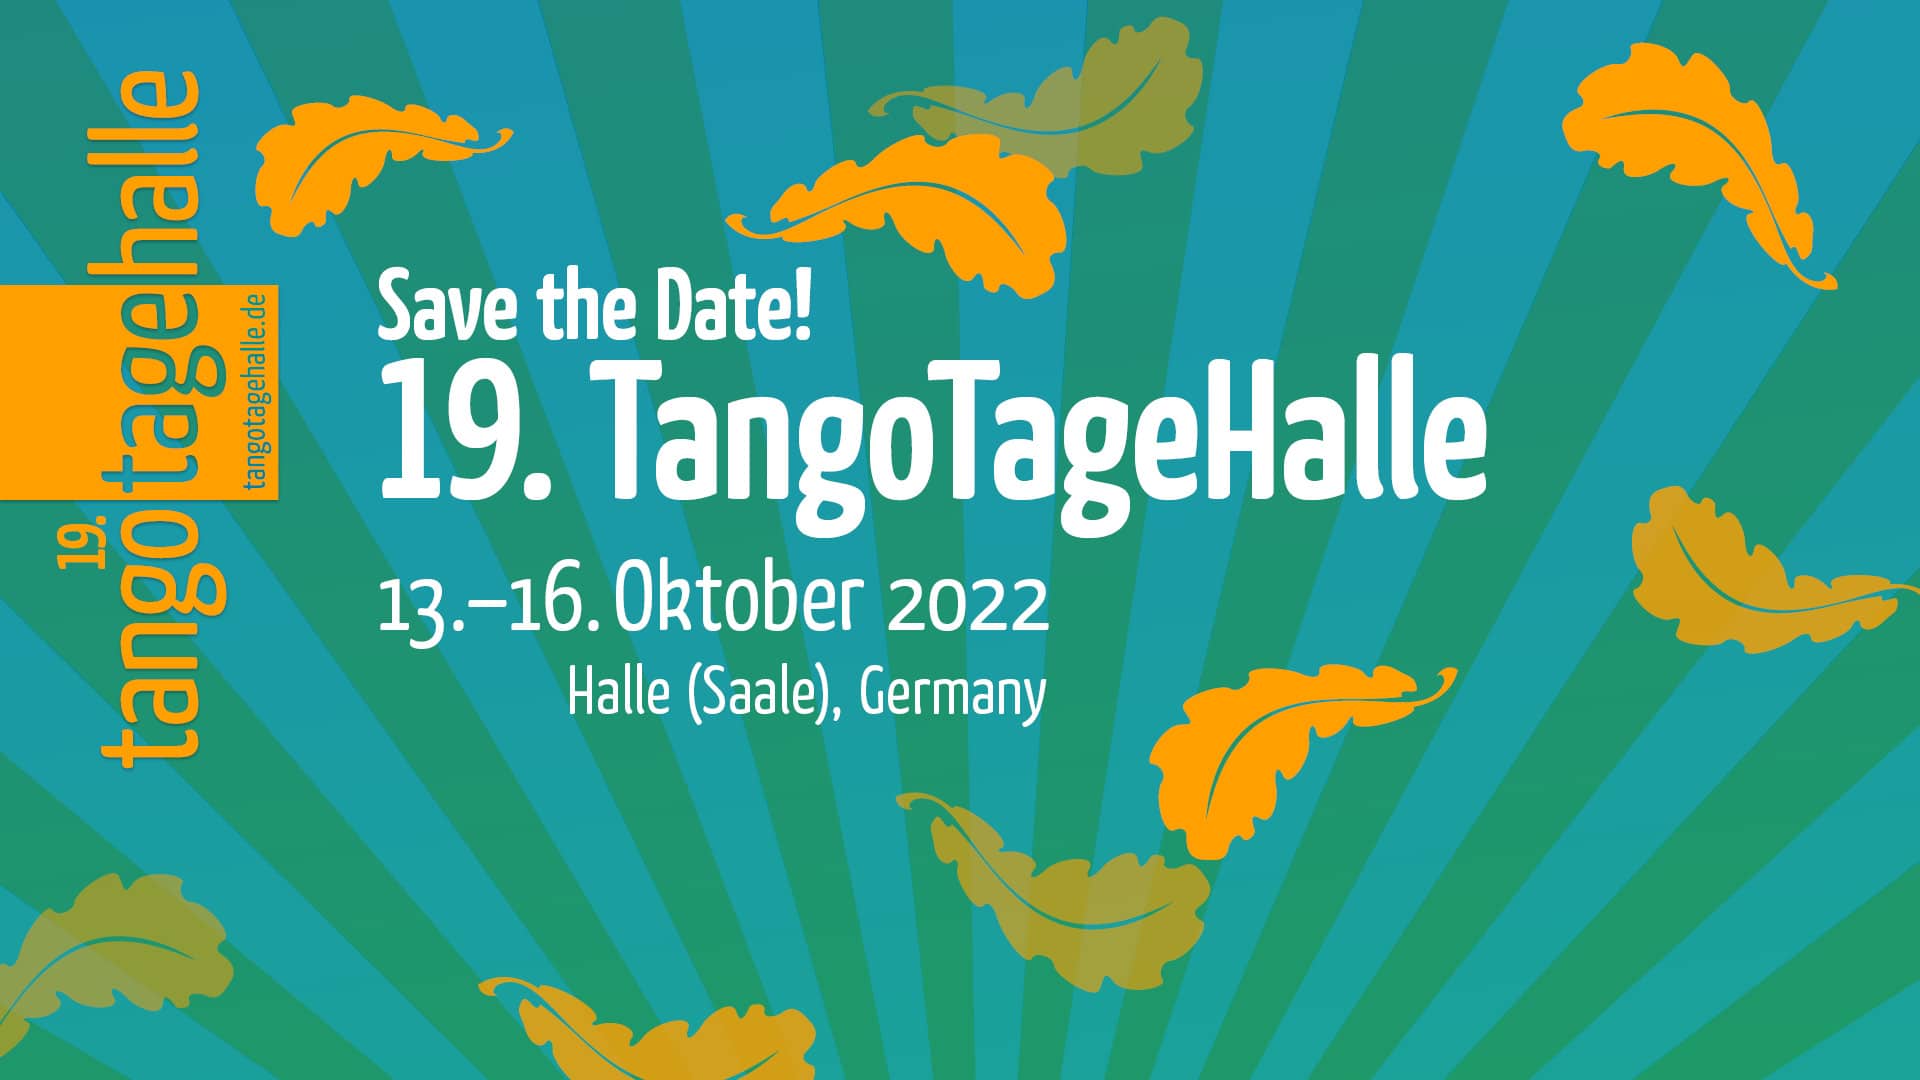 Tango Tage Halle 2022 event picture